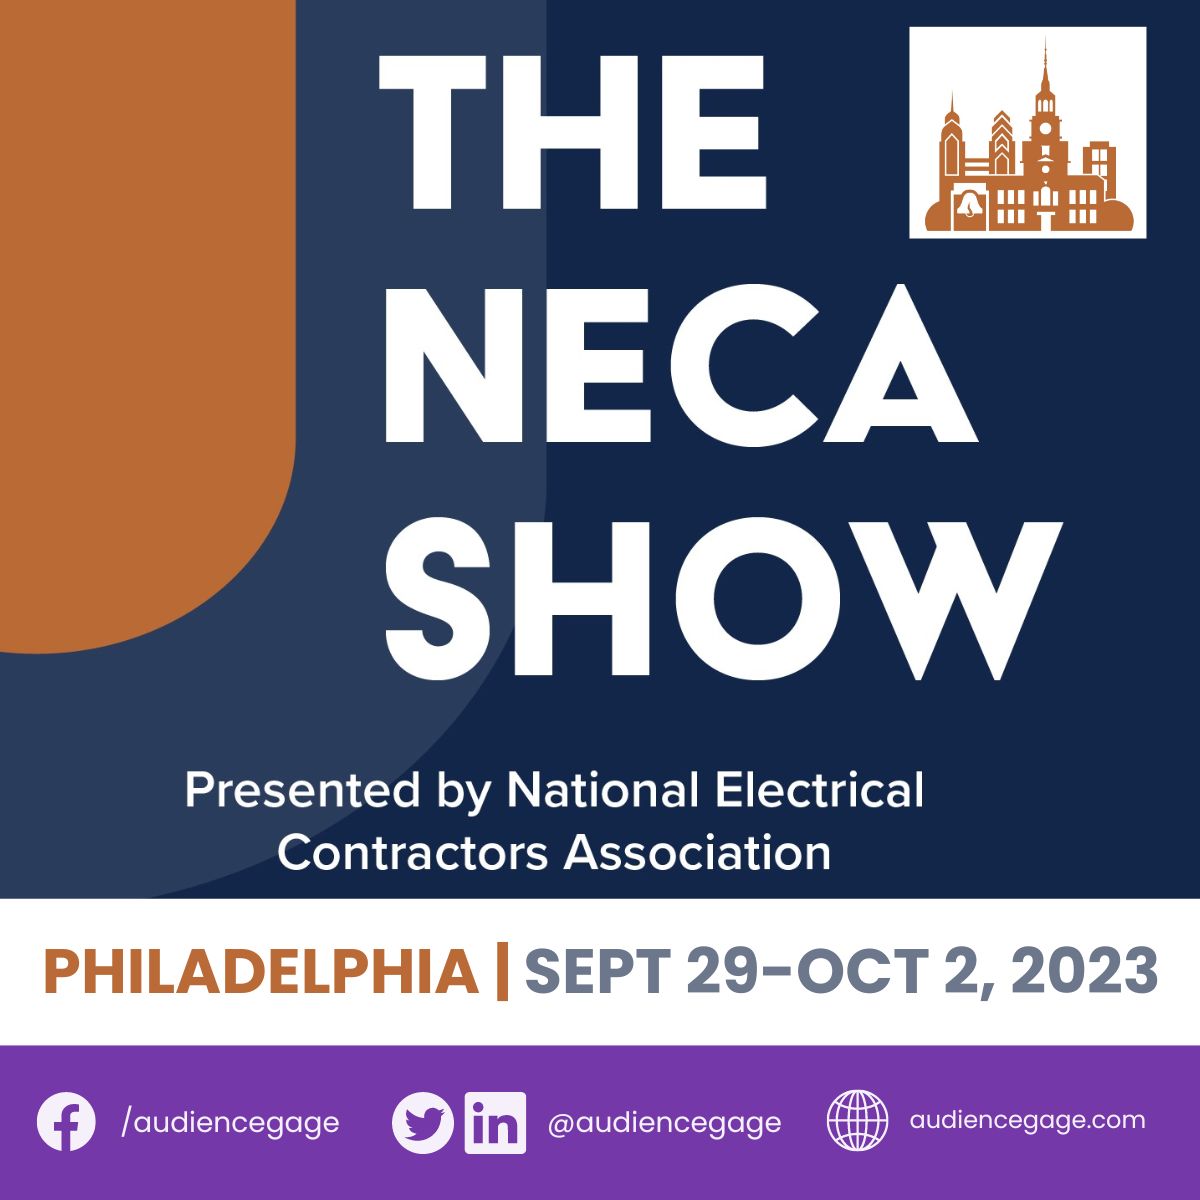 ⚡ Unleash Innovation at @necanet #NECASHOW2023! ⚡

📅 Sep 30 - Oct 2, 2023 📍 Philadelphia
Connect with experts, and explore cutting-edge tech! 🛠️

Featuring: @aidacorporation @DirectionalSys @JCCHelp

Don't miss out – secure your spot now! 🎉
Follow us for updates. 🚀